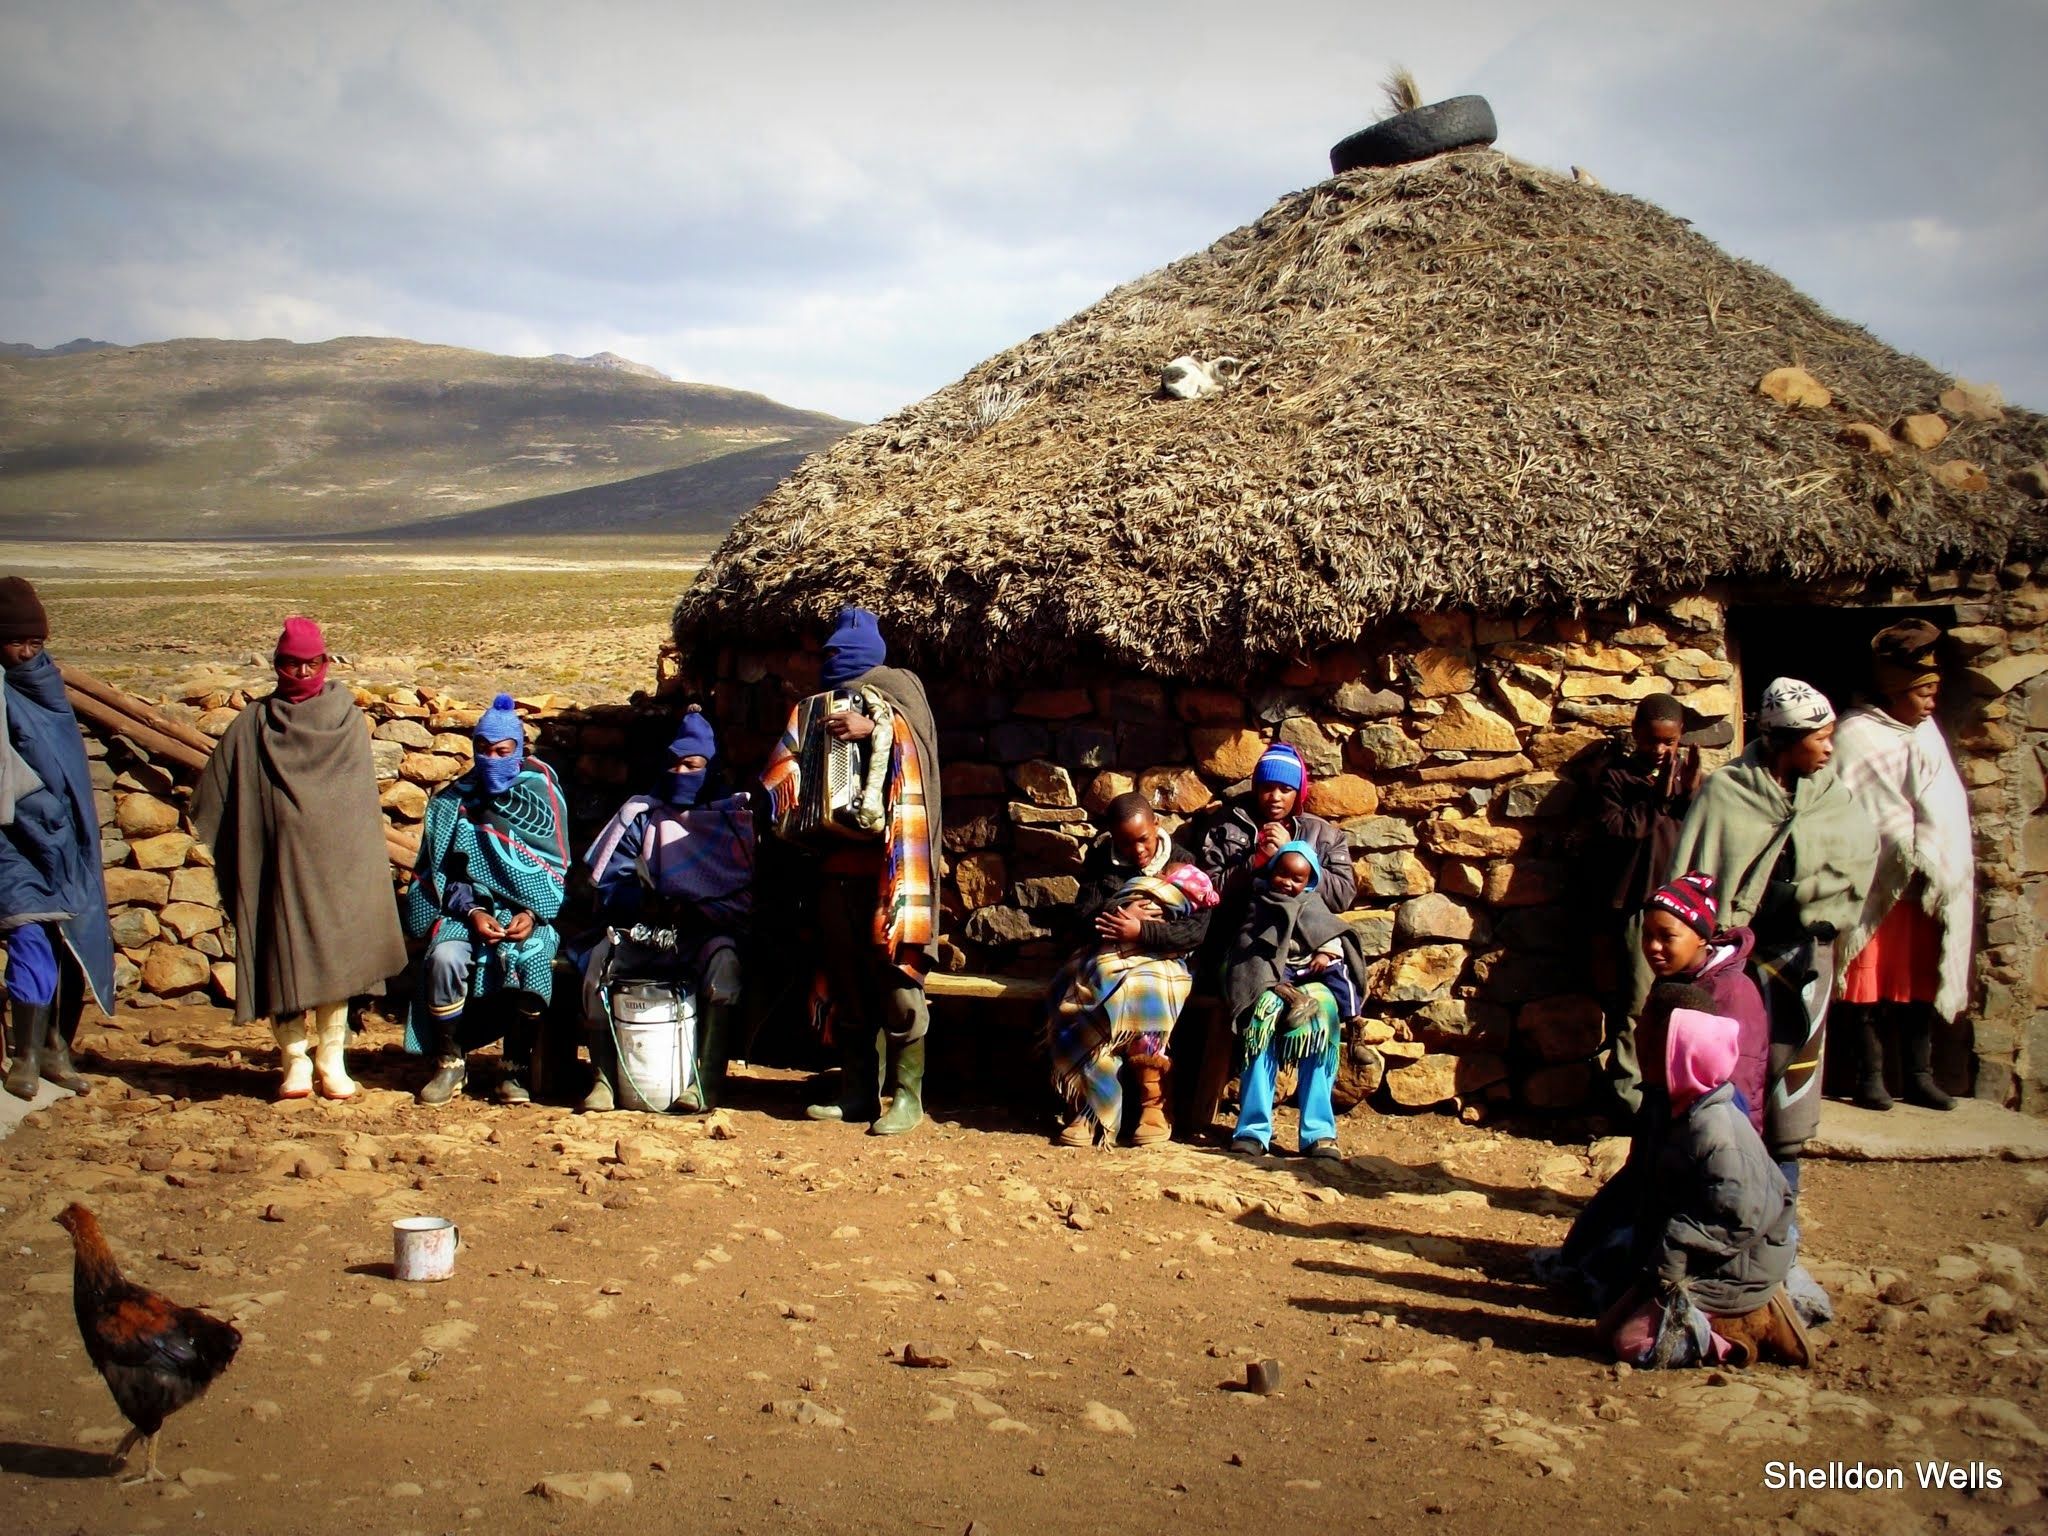 A group of Basotho people wrapped on blankets absorb the warmth of the late morning sun. They stand and sit near a traditional hut made of grass and stone